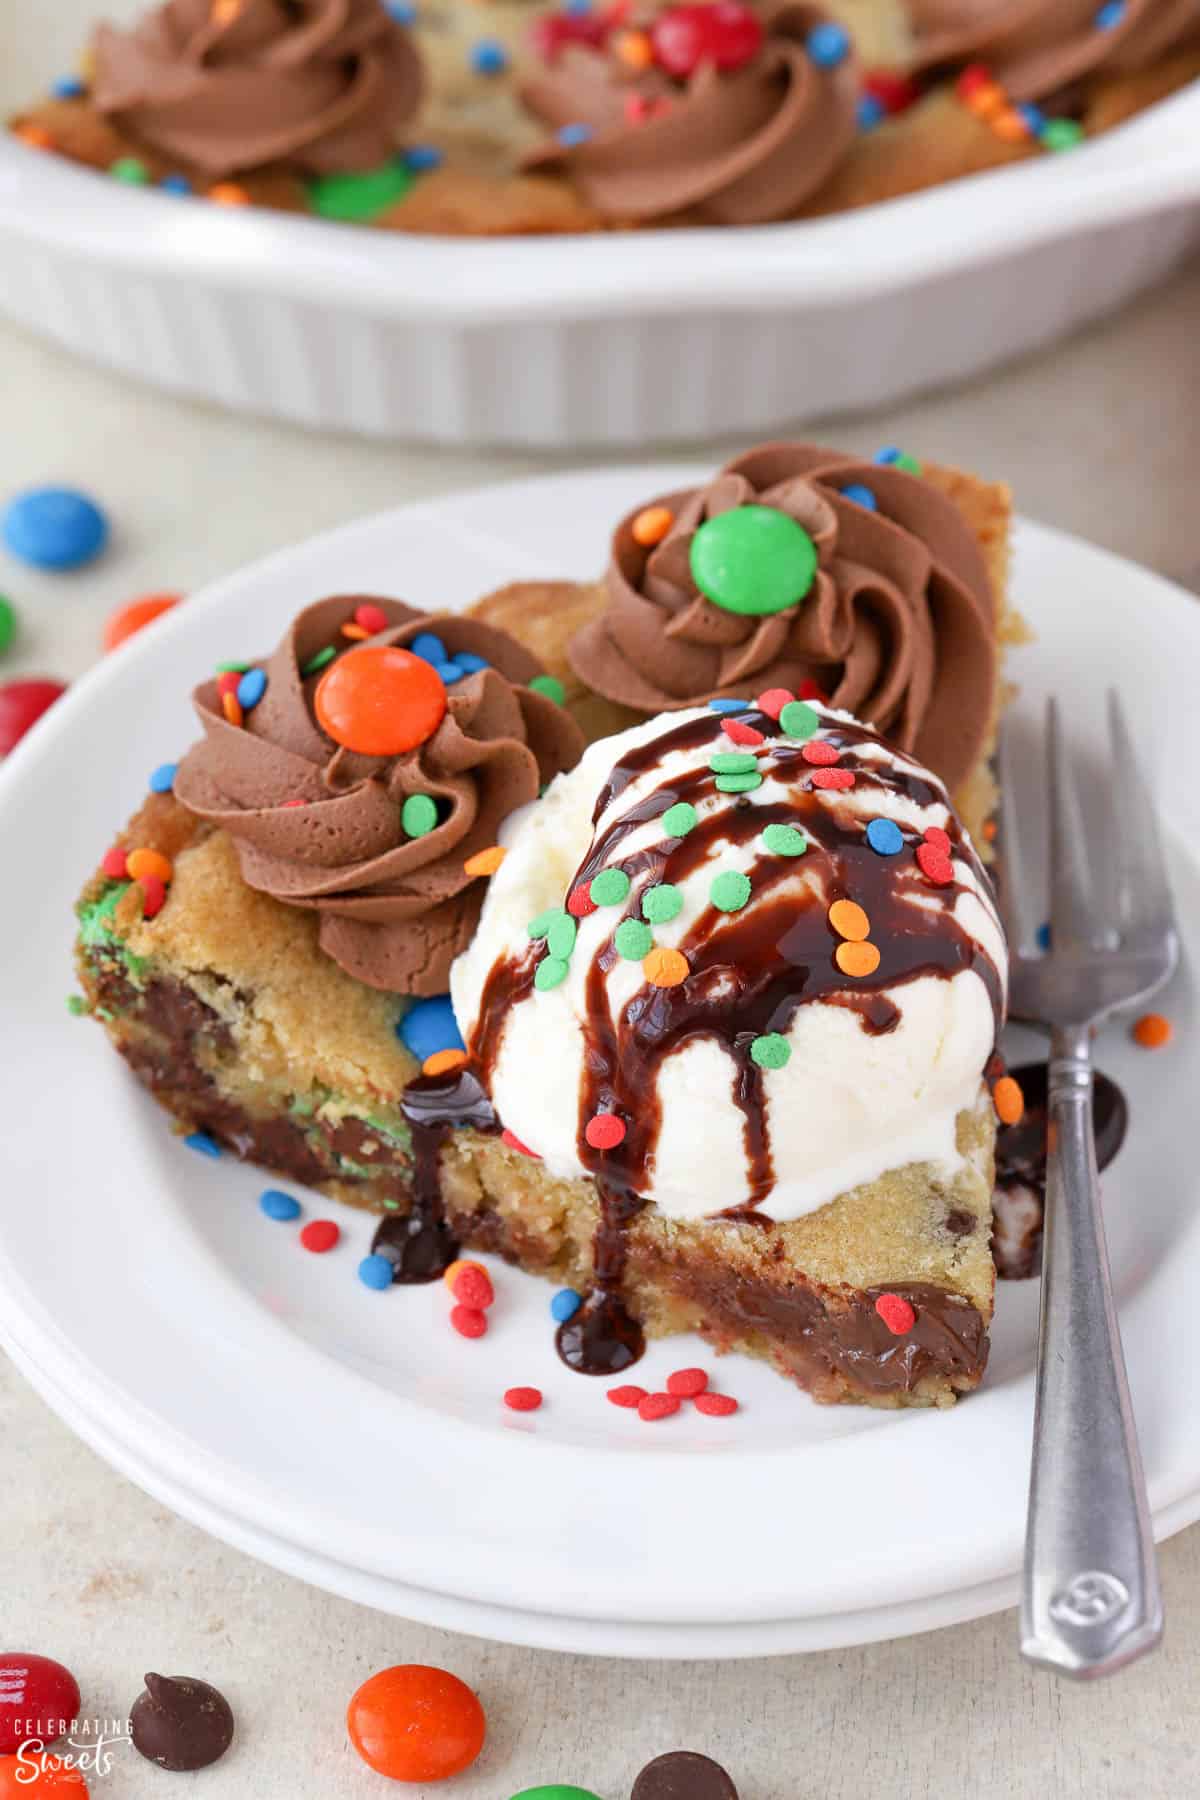 Slice of chocolate chip cookie cake topped with ice cram and hot fudge sauce